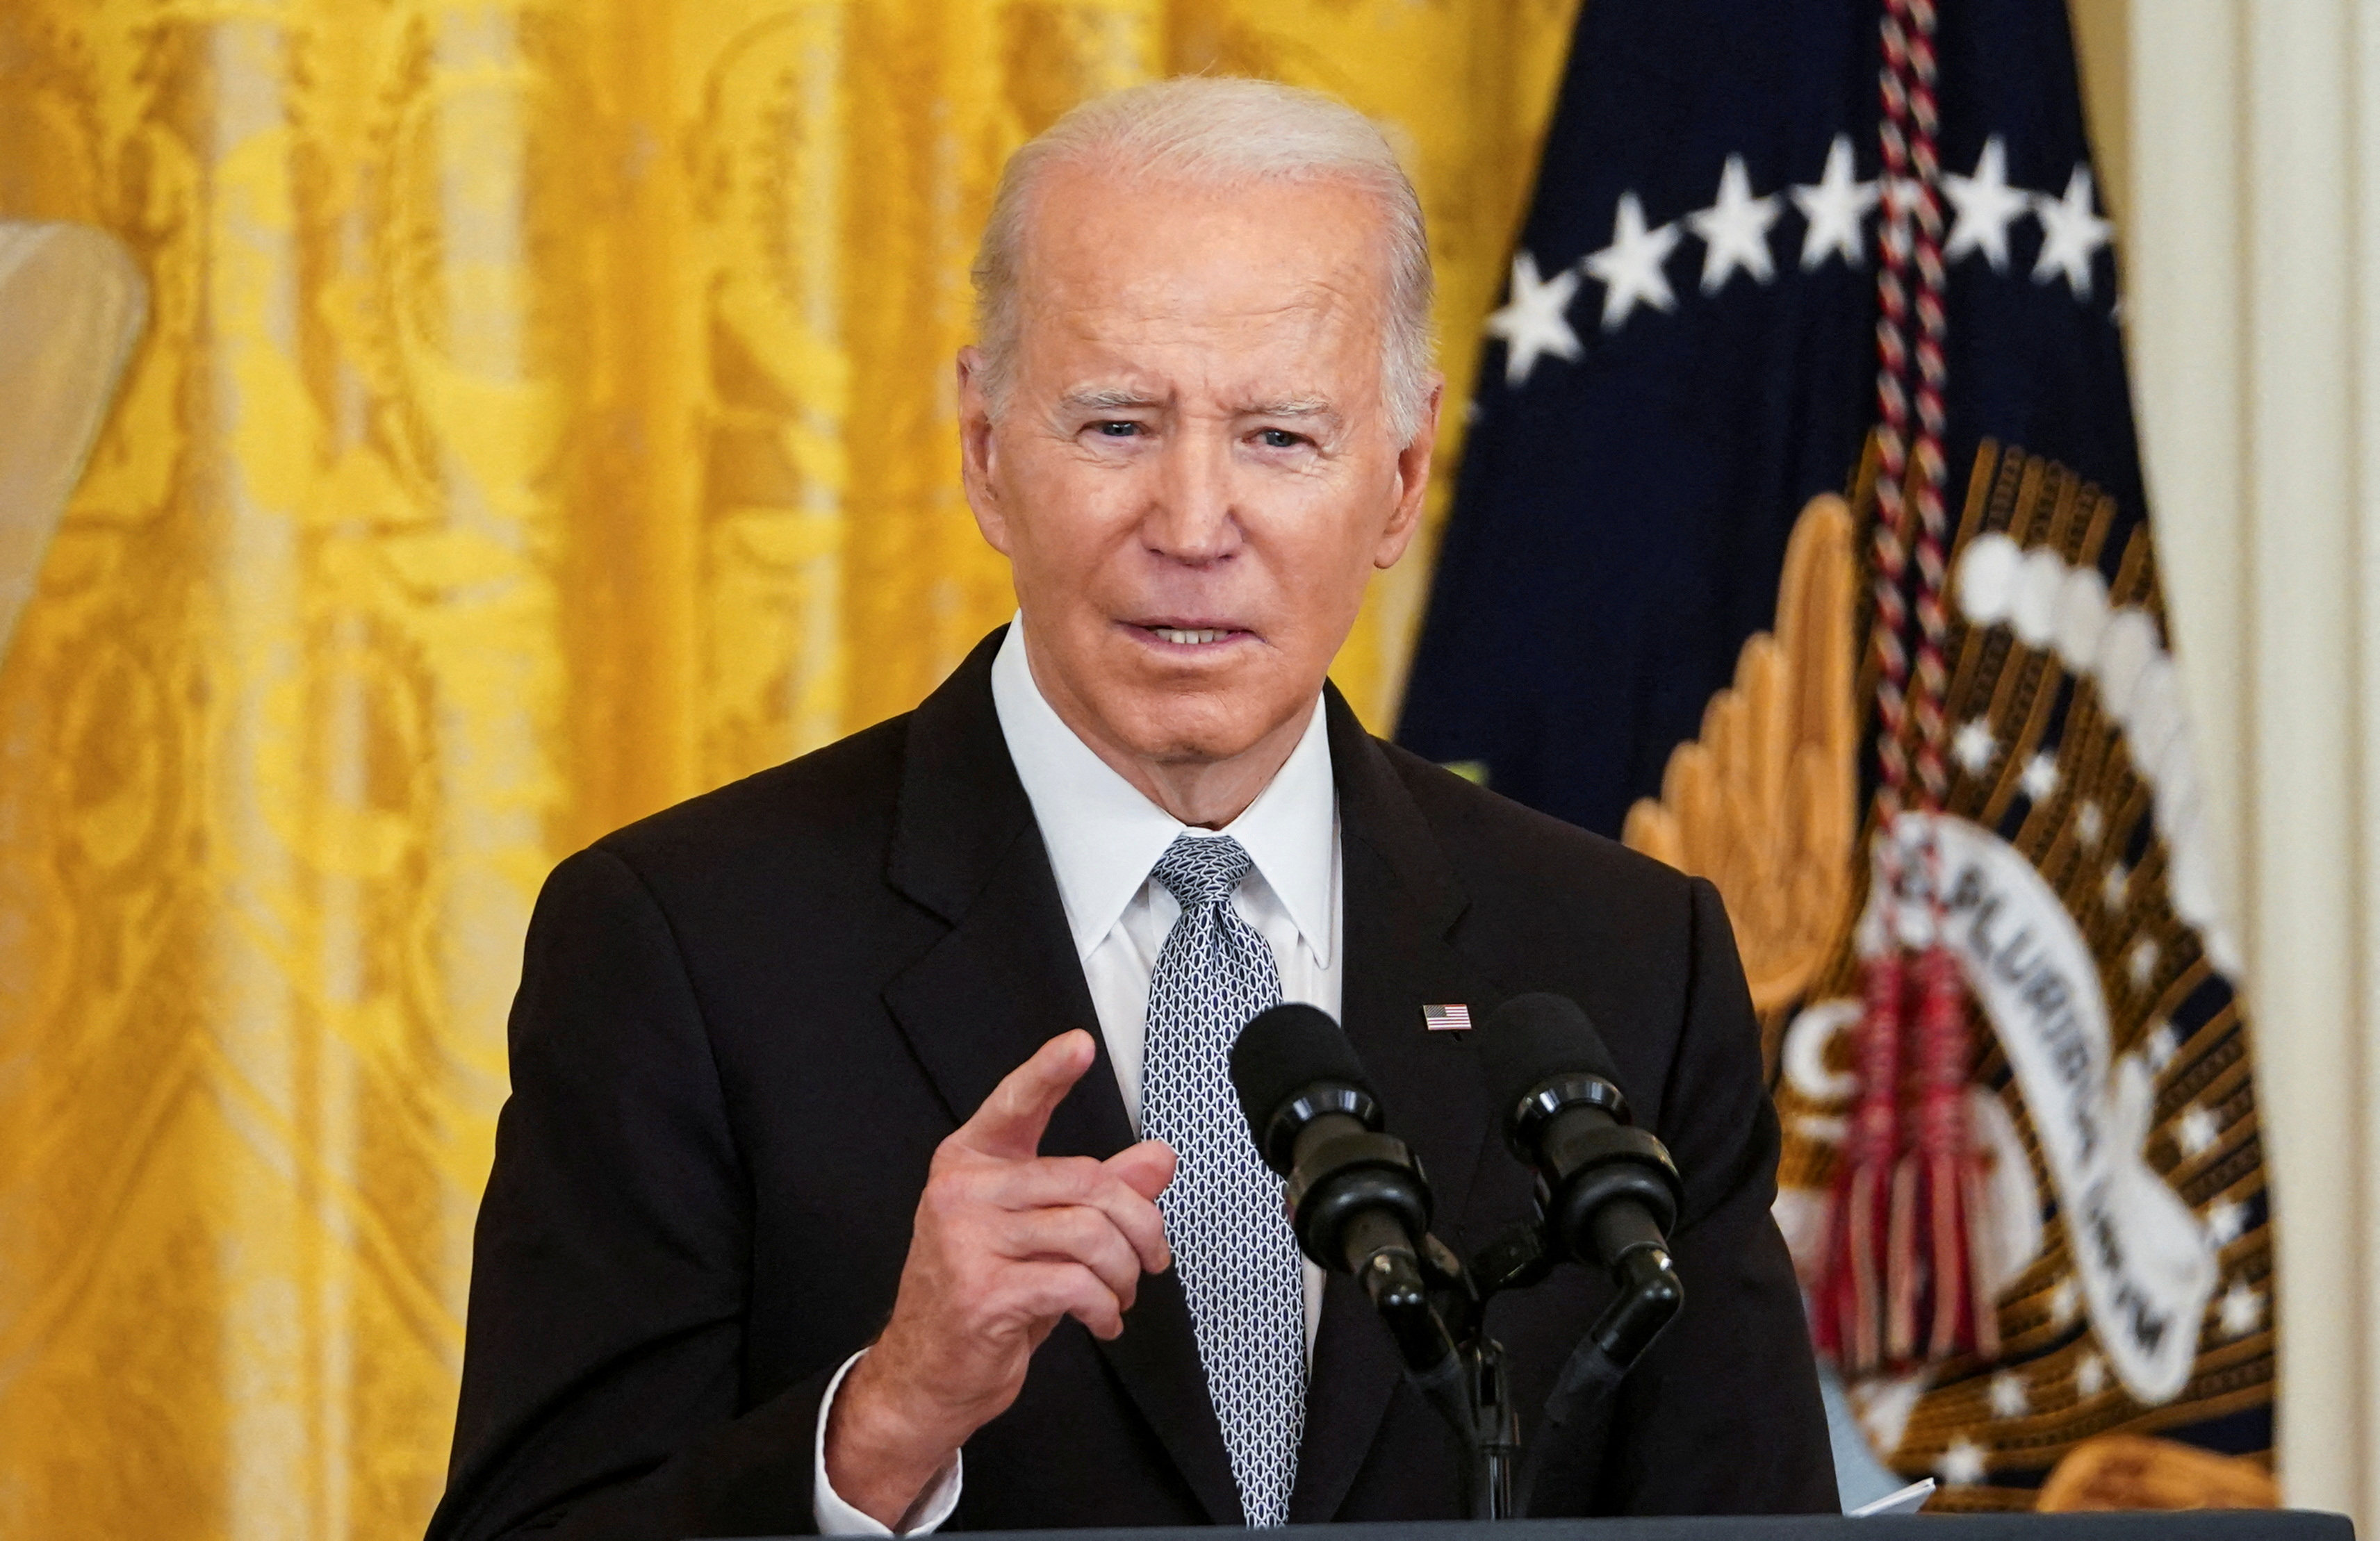 US President Joe Biden speaks at an event at the White House on Monday. Photo: Reuters